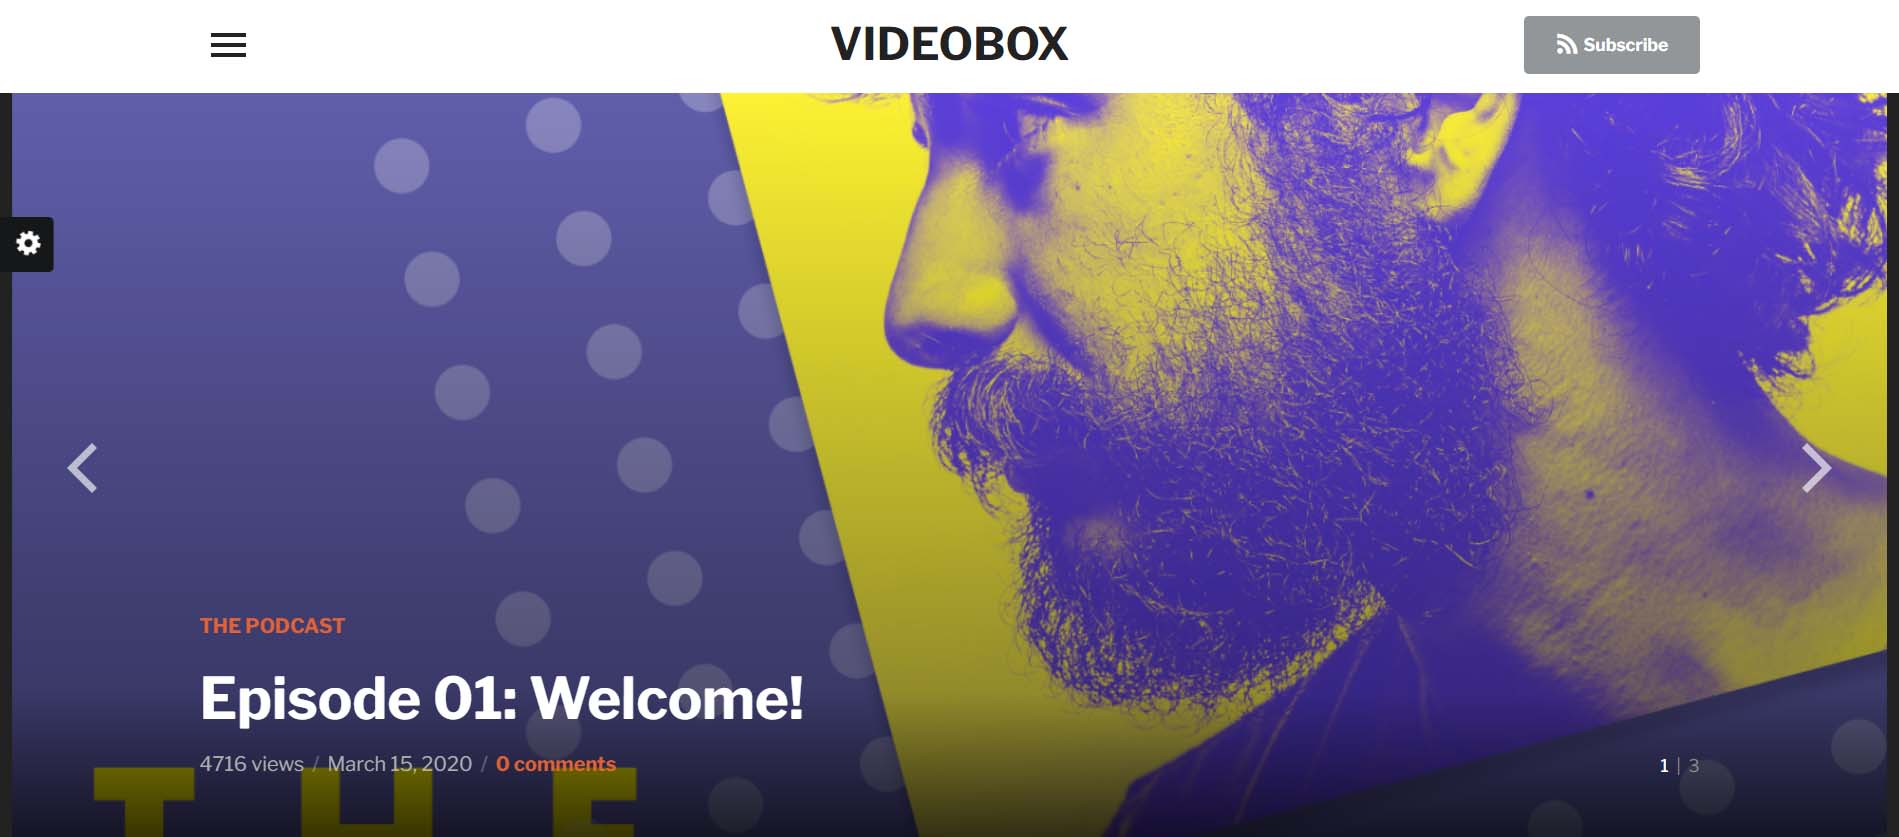 VideoBox, one of the best WordPress themes for podcasts